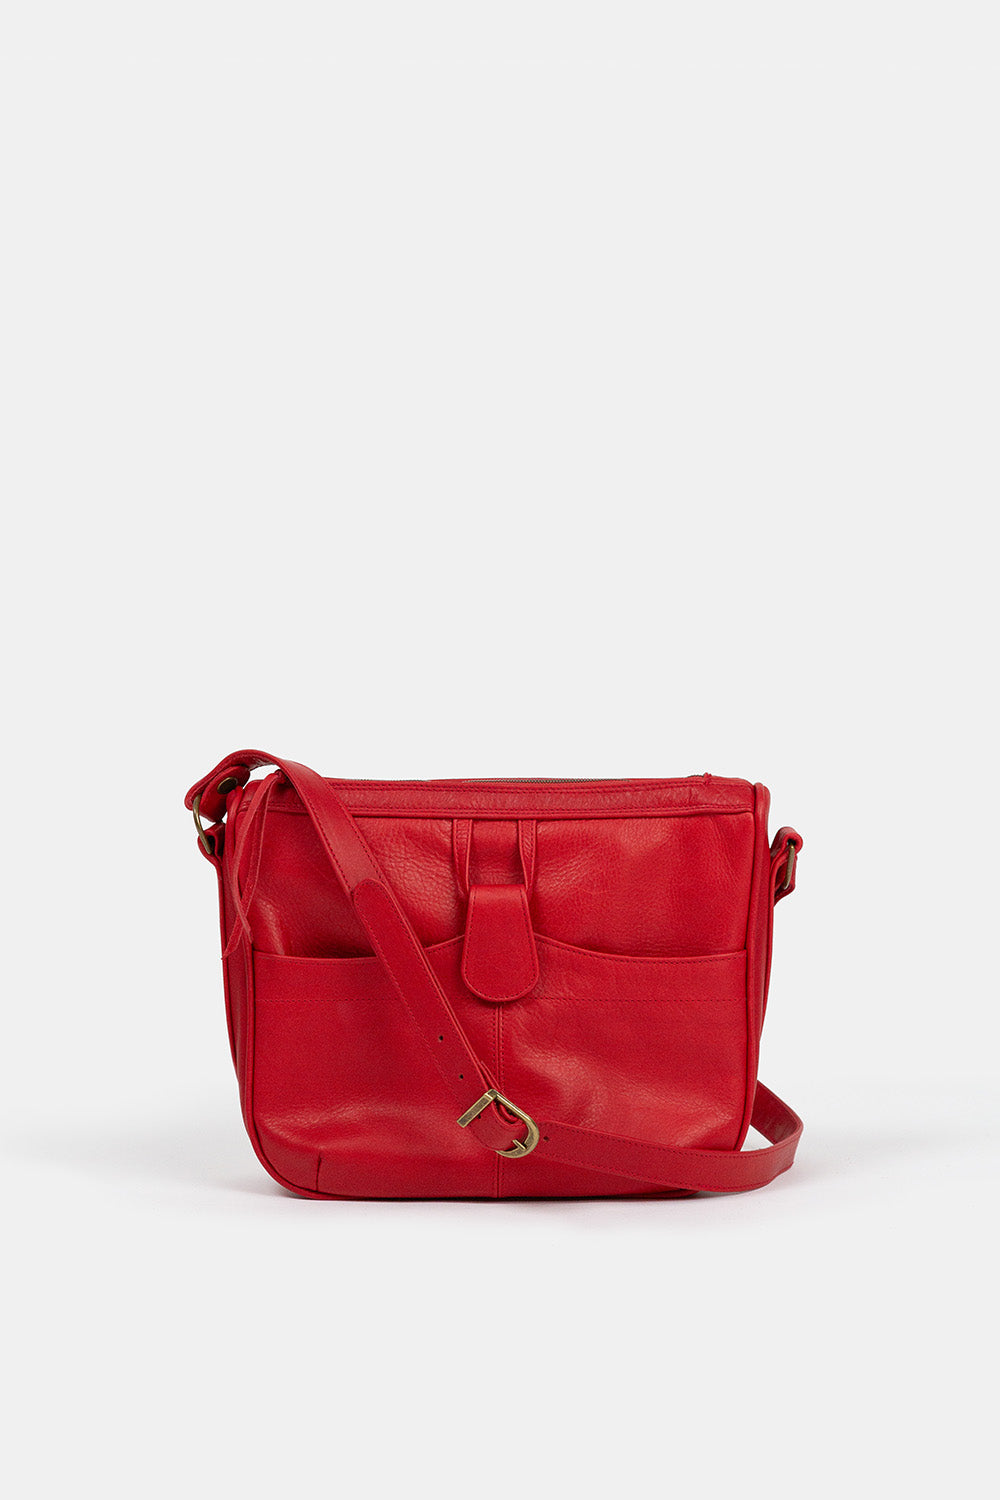 Twiggy Leather Shoulder Bag in Vermiion